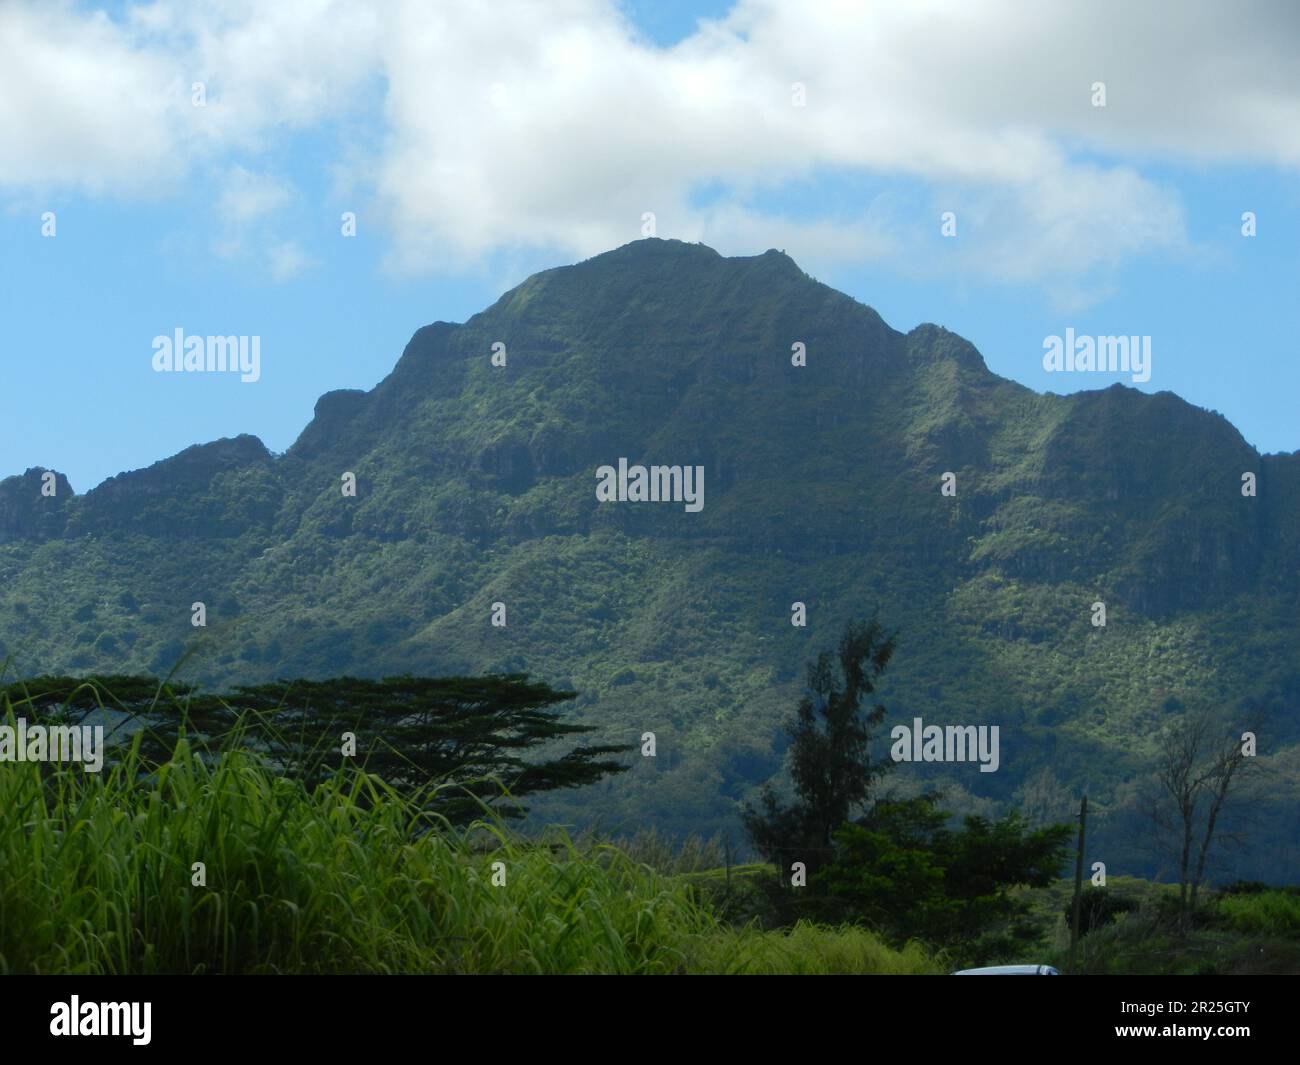 Mountain range in Kauai Hawaii that looks like a sleeping giant on a partly cloudy day with grass and trees in the foreground. Stock Photo